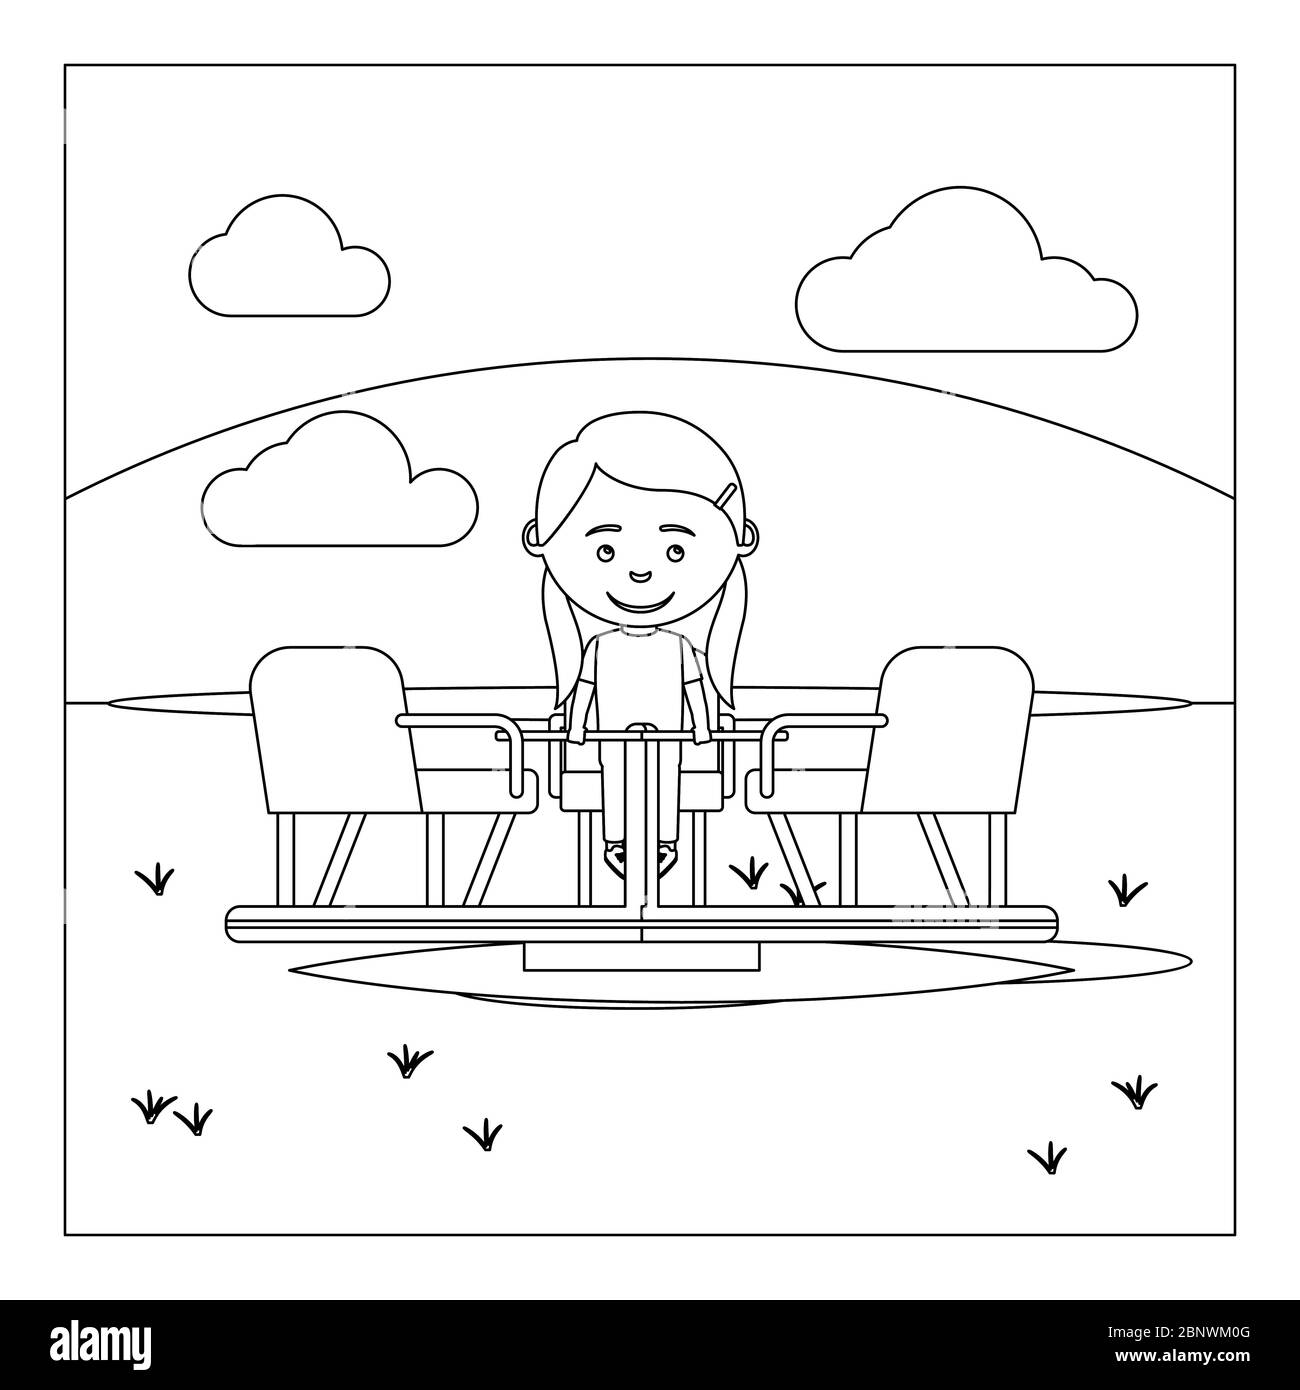 Coloring book page design with kid on playground. Vector illustration Stock Vector